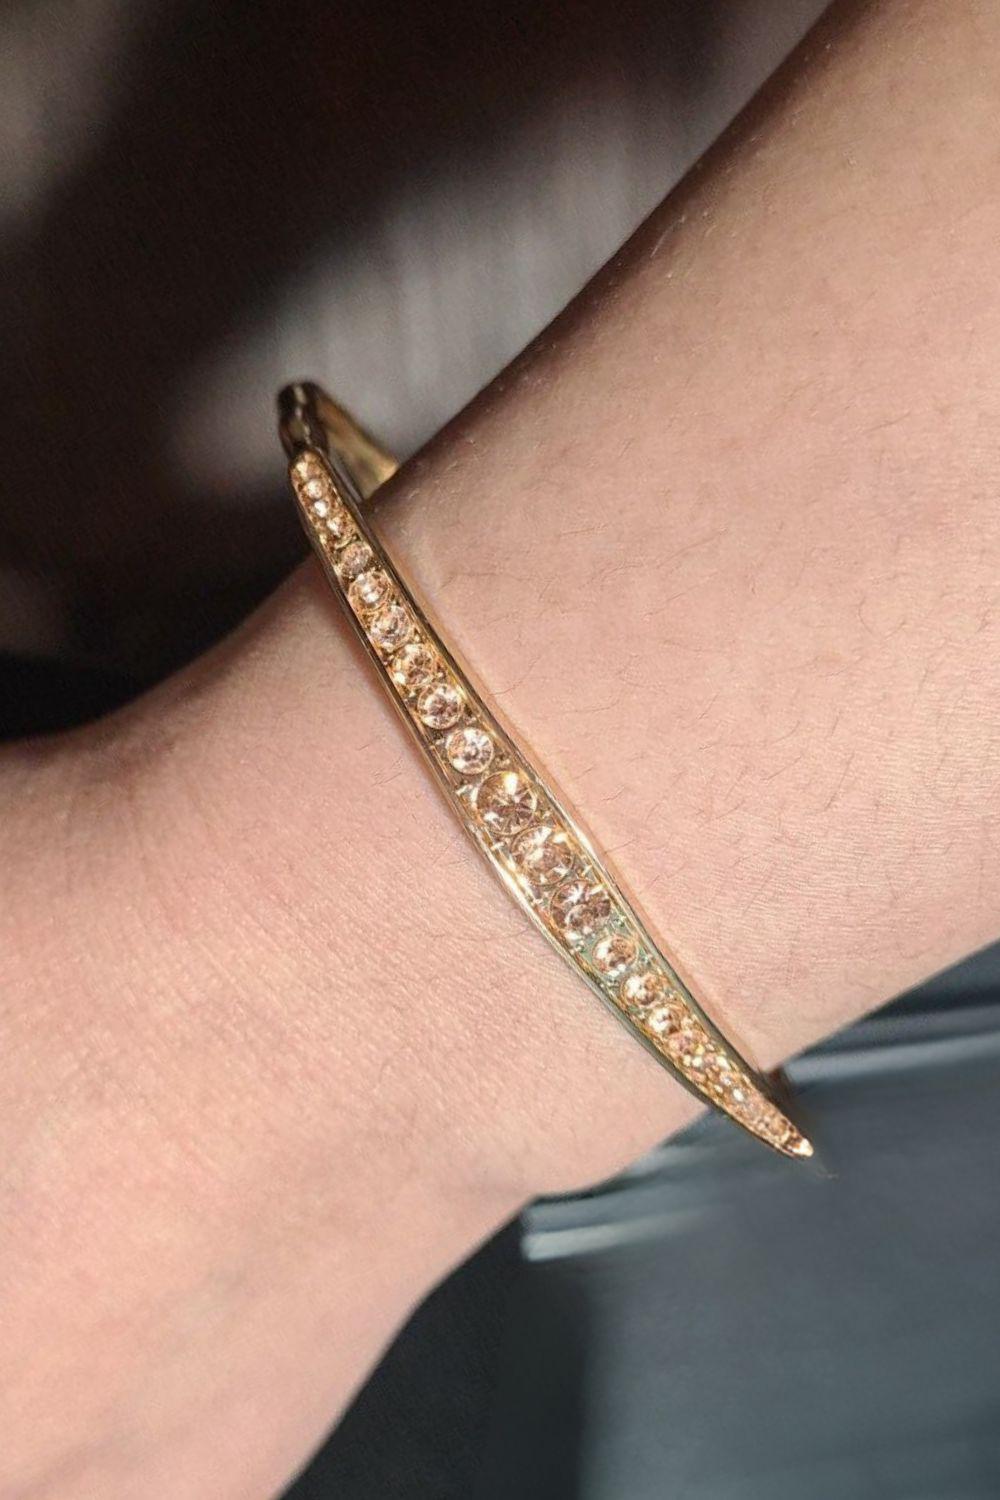 Just SPARKLE and Wave Gold Bracelet - Paparazzi Accessories- lightbox - CarasShop.com - $5 Jewelry by Cara Jewels